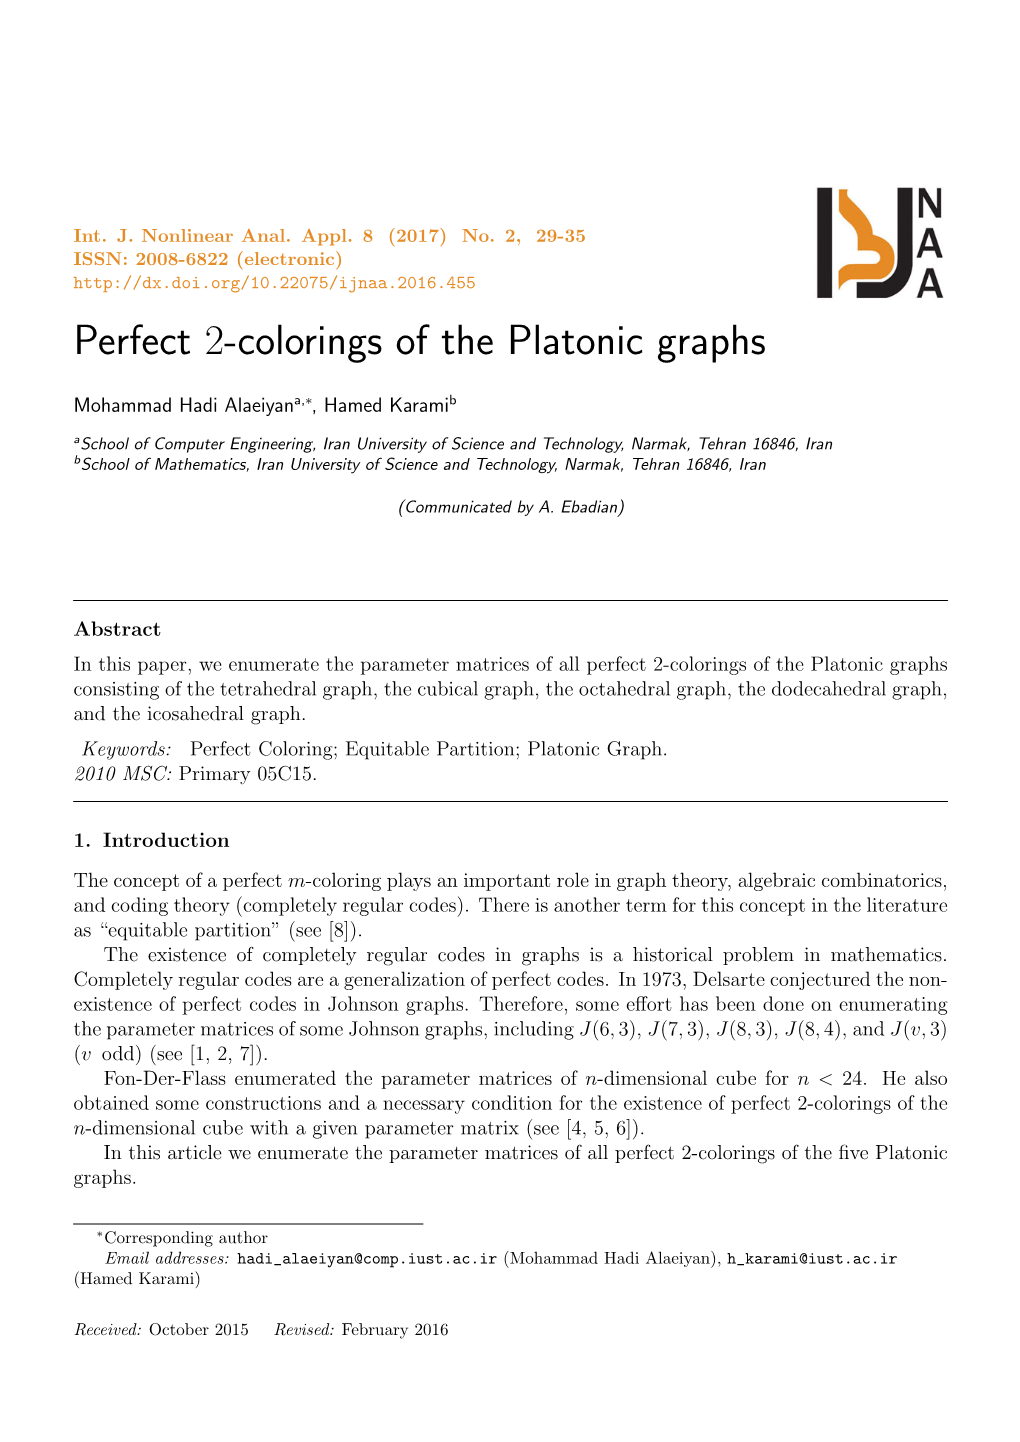 Perfect 2-Colorings of the Platonic Graphs